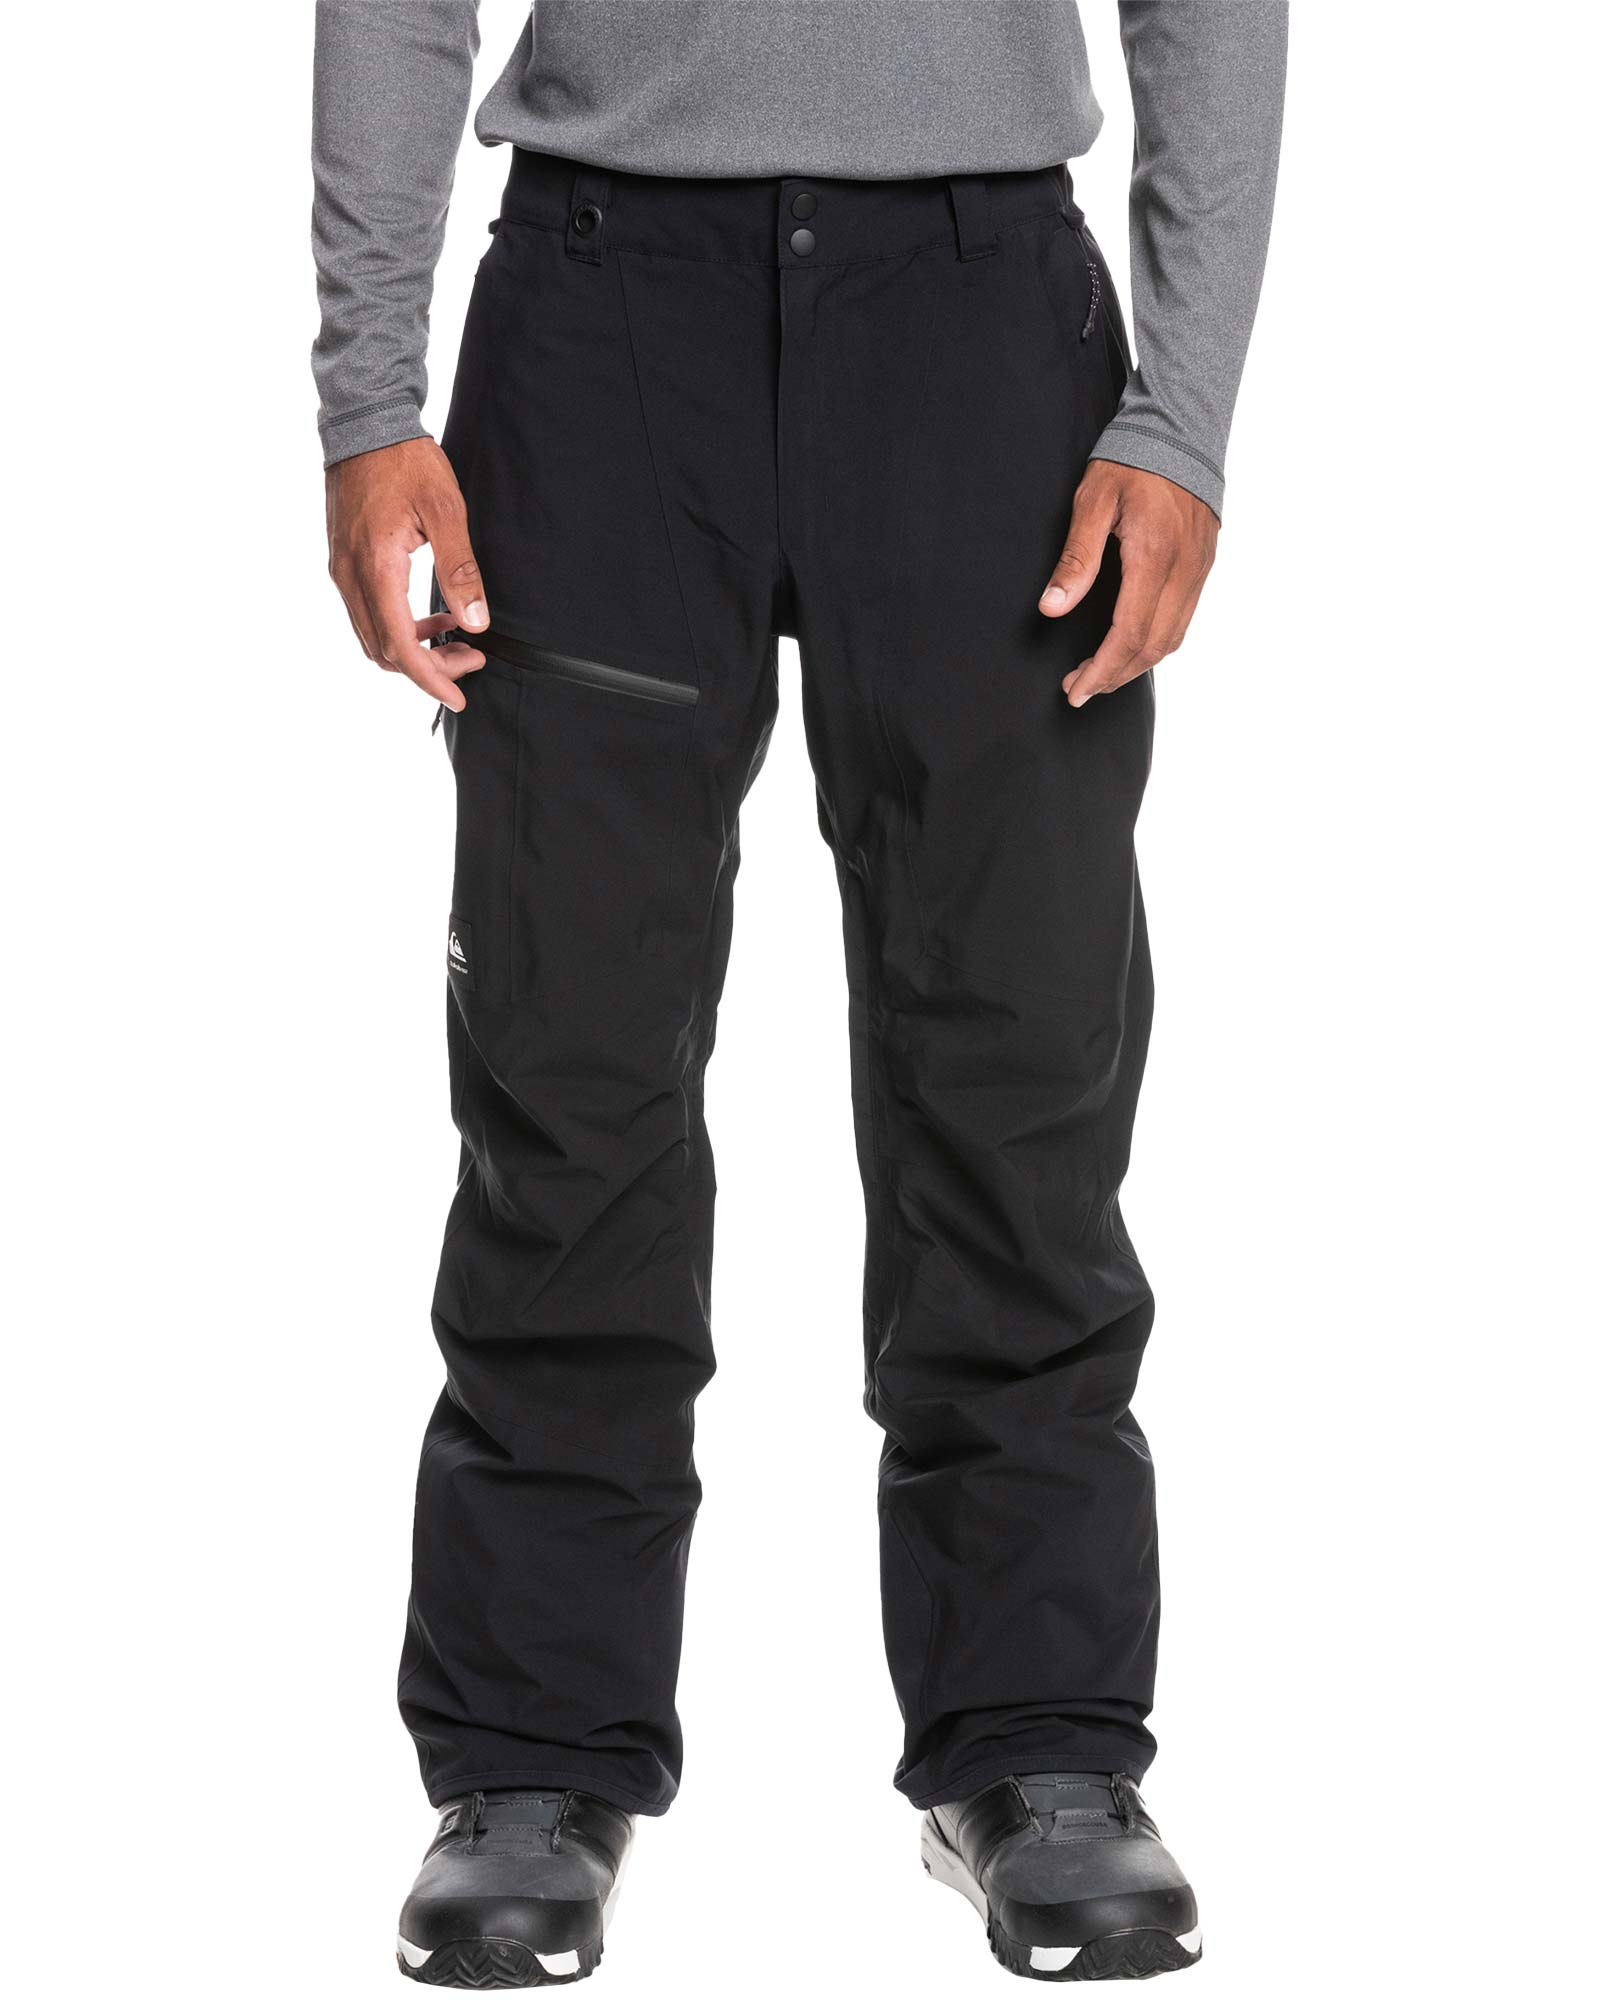 Quiksilver Forever Stretch GORE TEX Insulated Men’s Pants - True Black S